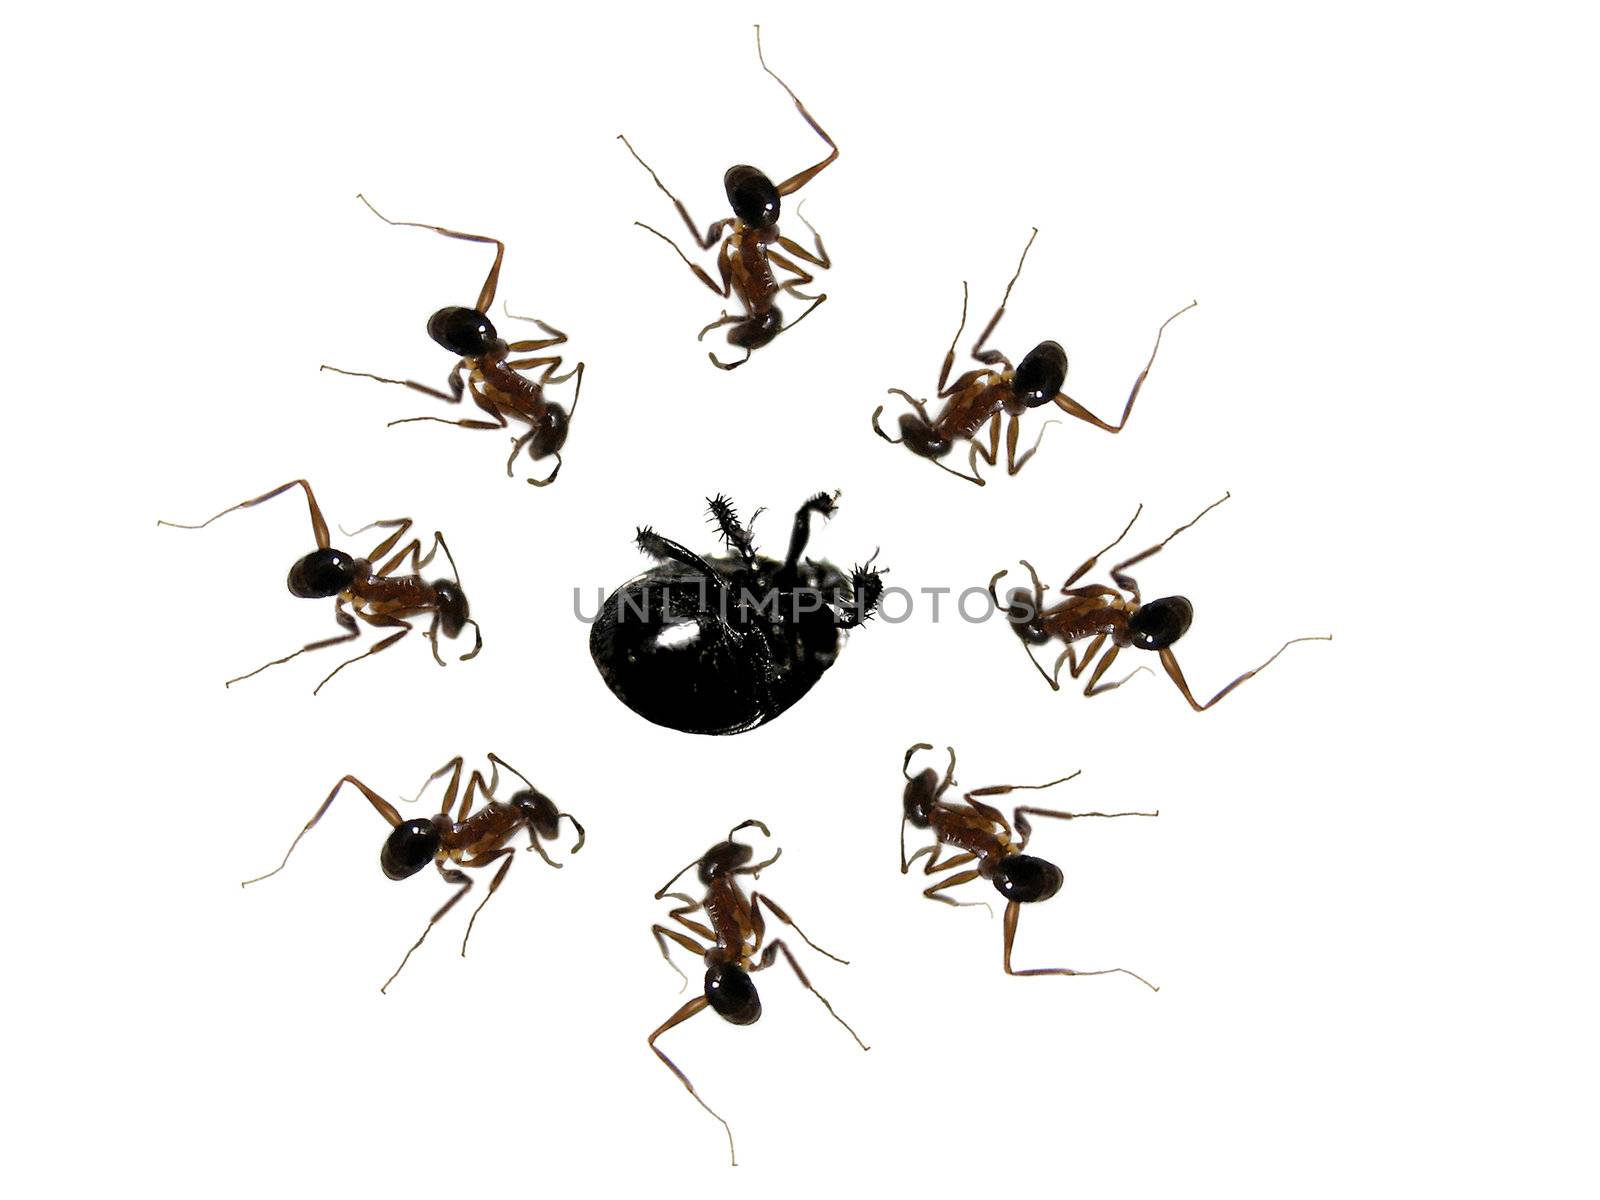 A metaphorical image of a team of ants strategically killing an insect, isolated on white background.